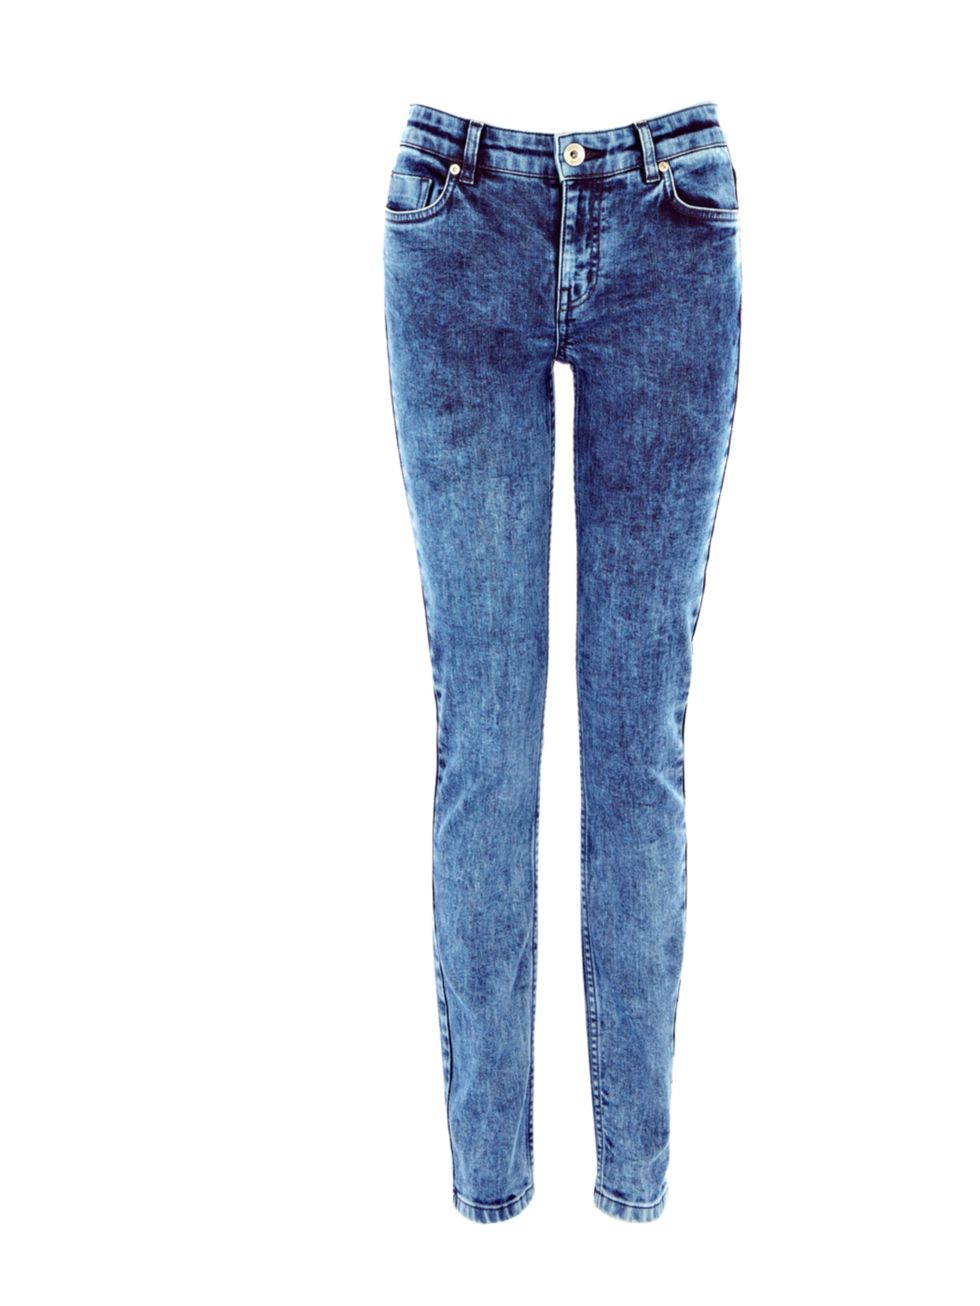 <p>Cropped tops and platform trainers are back in the shops, and now another 90s favourite is in store: bleached denim <a href="http://www.oasis-stores.com/ALLDenim/dept/fcp-category/categorylist?resetFilters=true">Oasis</a> skinny jeans, £45</p>